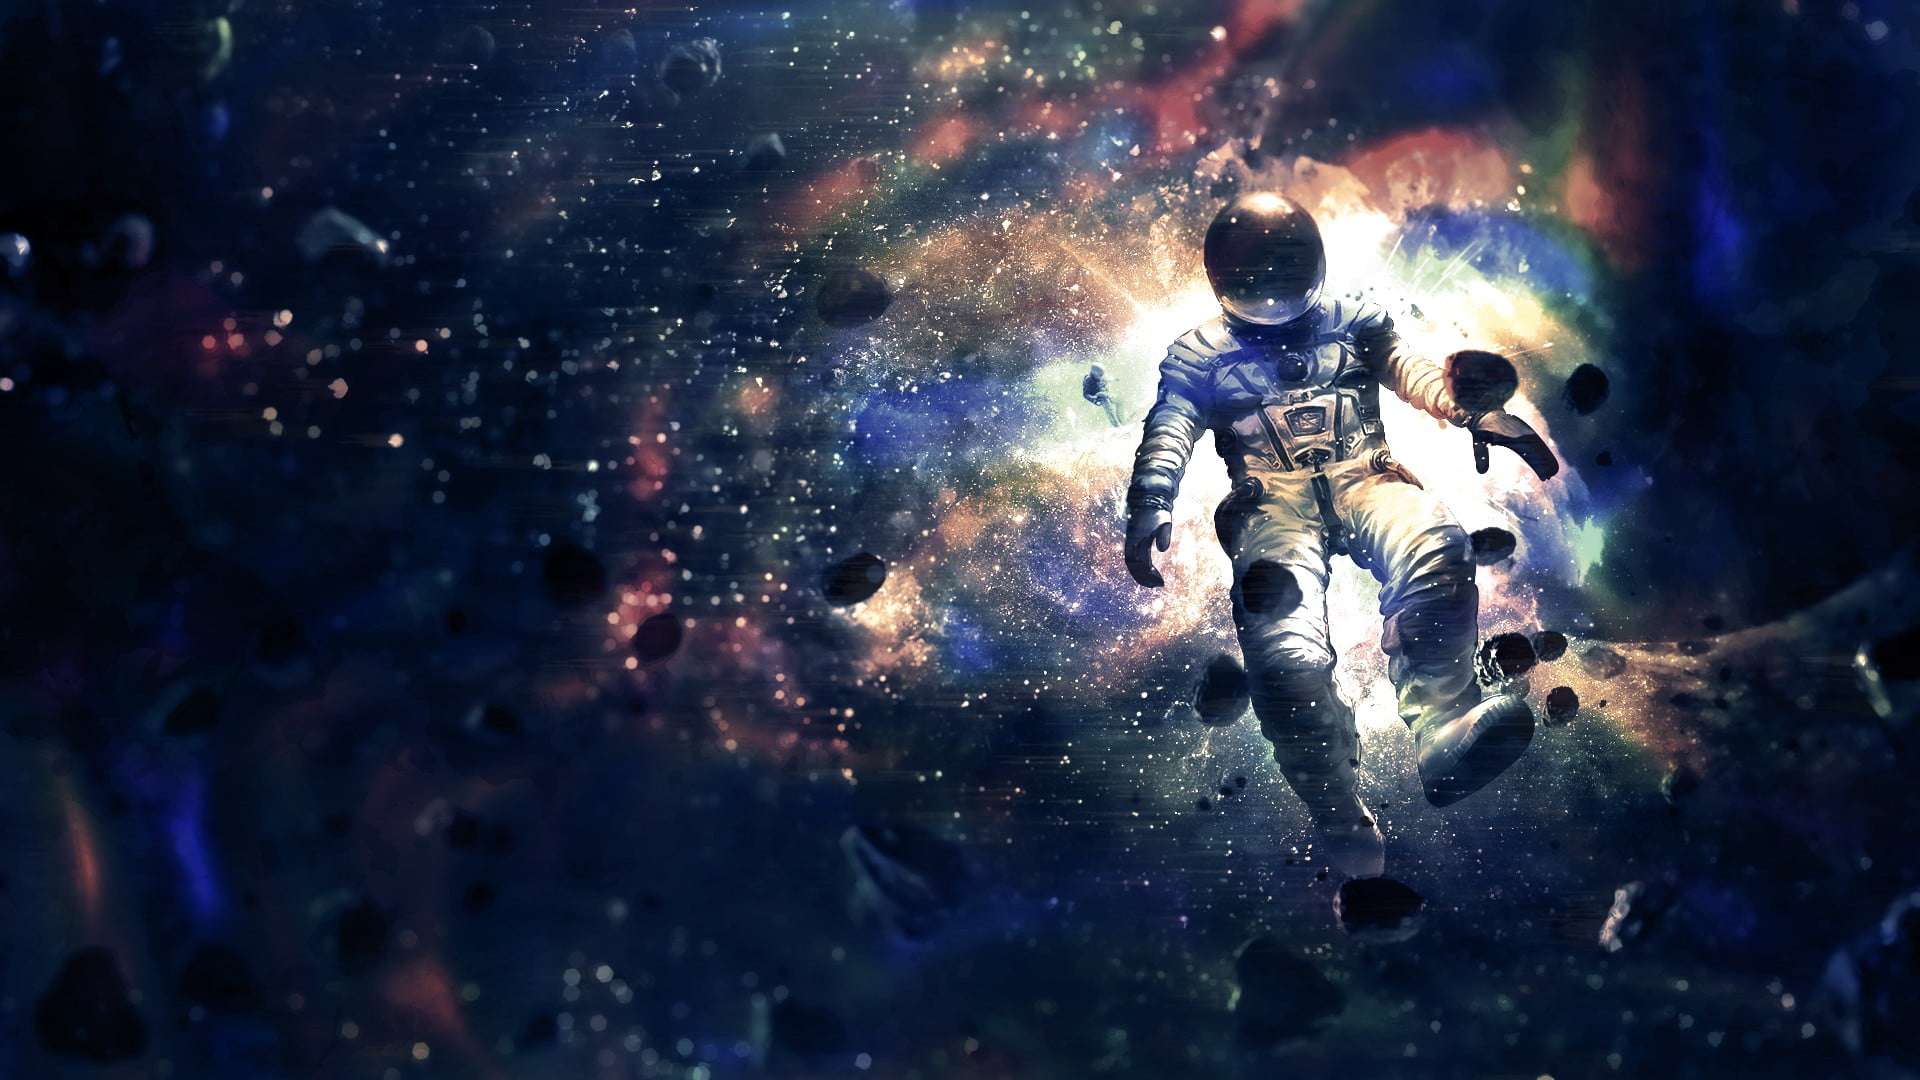 Floating Astronaut Wallpapers Top Free Floating Astronaut Backgrounds